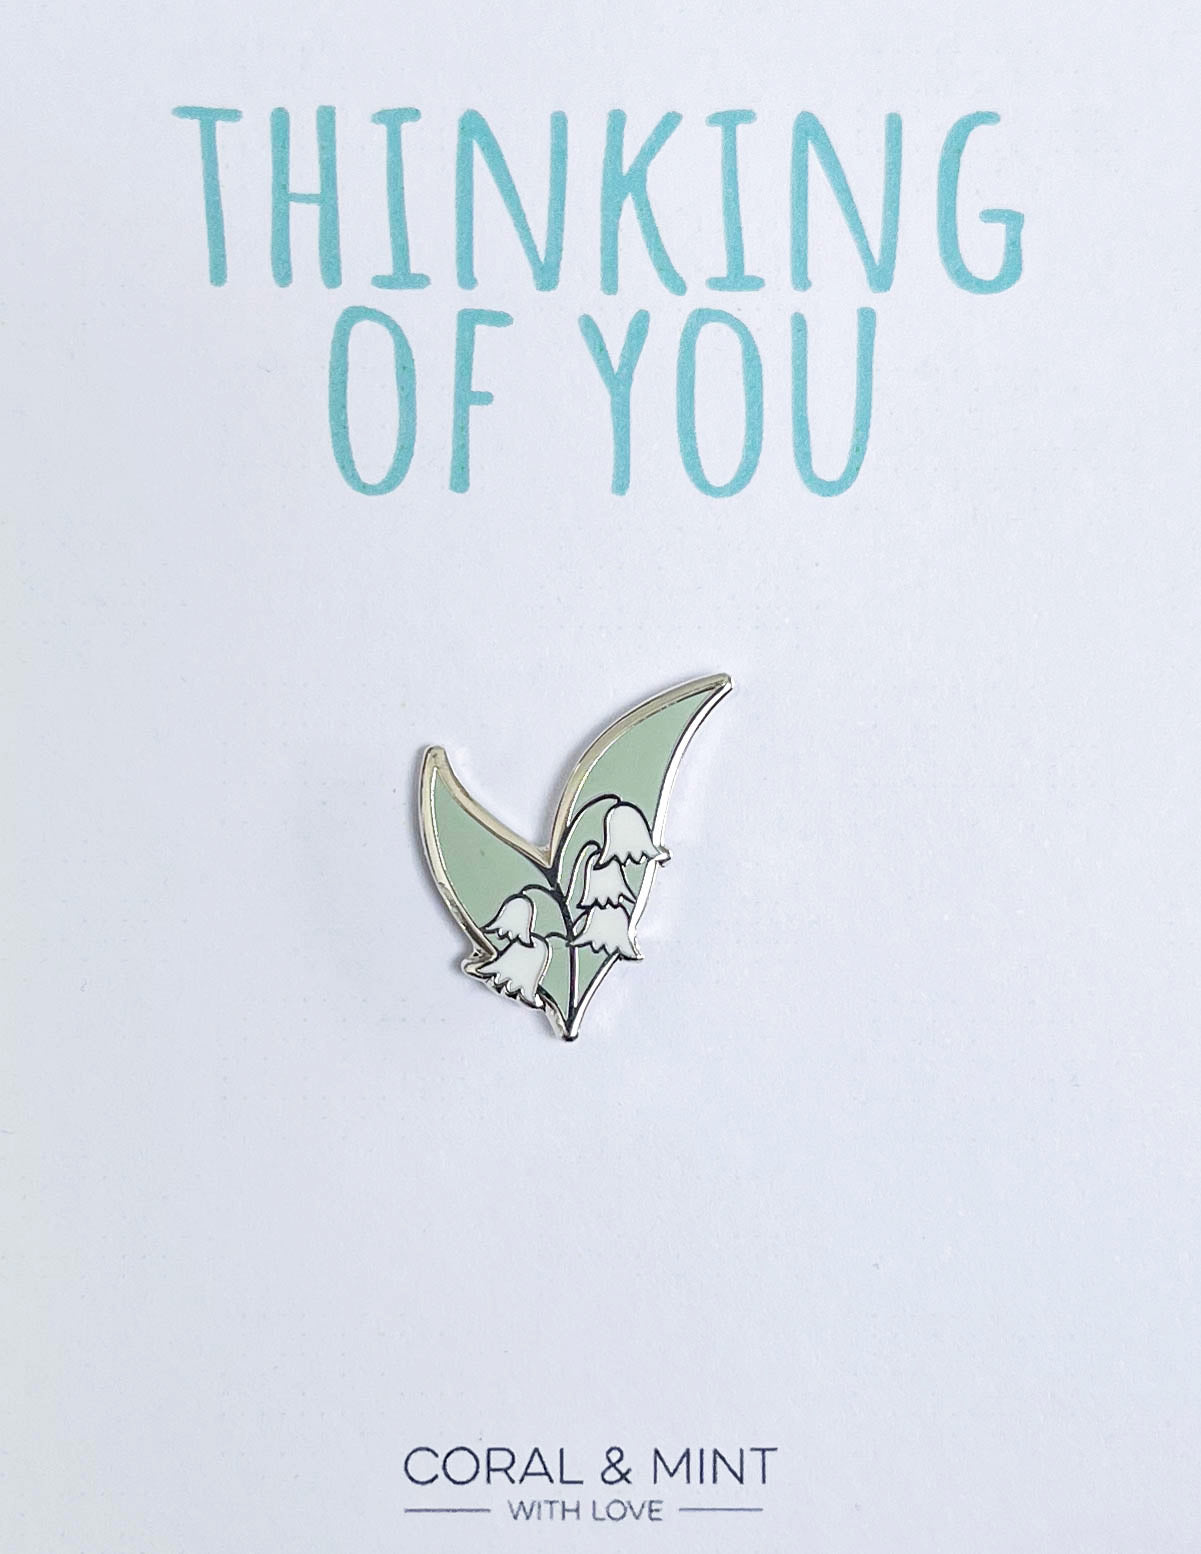 Lily of the valley pin on a thinking of you card